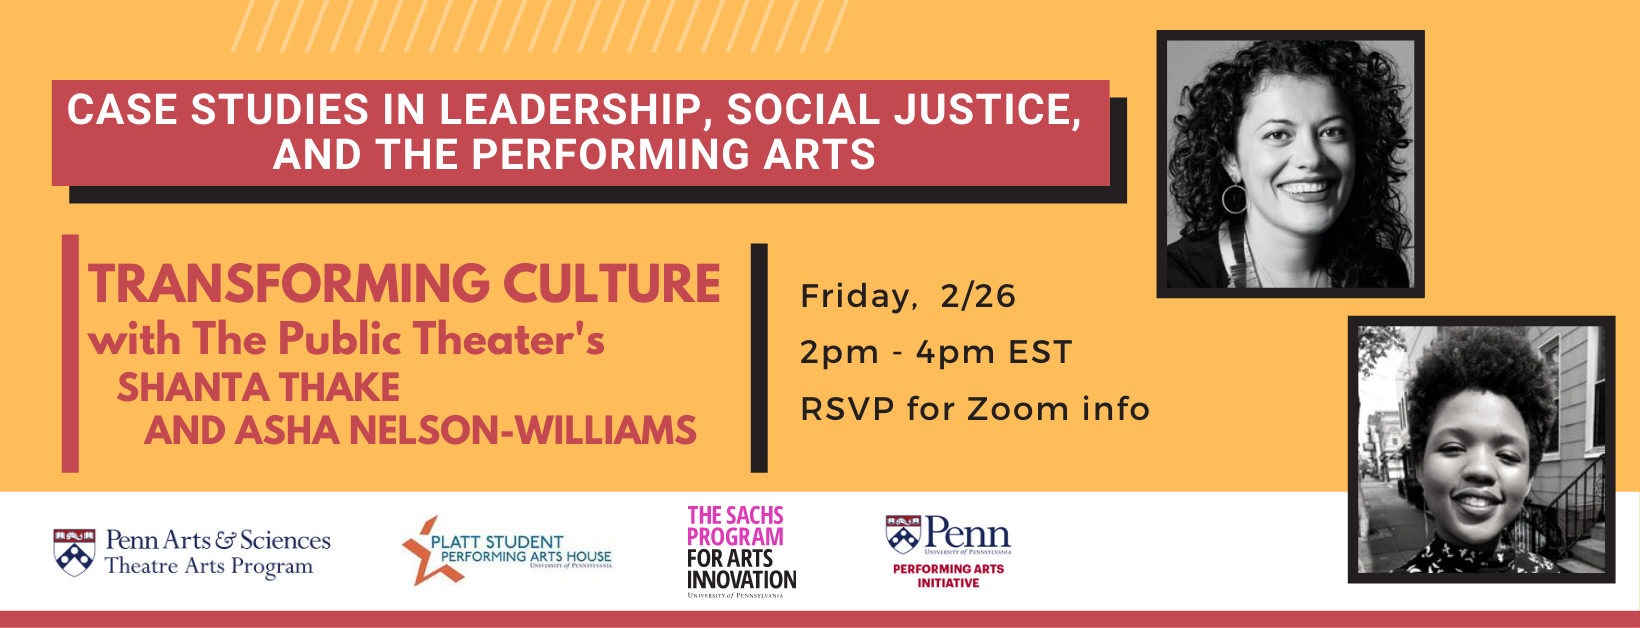 Banner for event: Transforming Culture with The Public Theater's Shanta Thake and Asha Nelson Williams -- Date of Event: Friday, February 26th Time of Event: 2pm to 4pm Eastern Standard Time Other Information: Register to receive a Zoom Link for the event